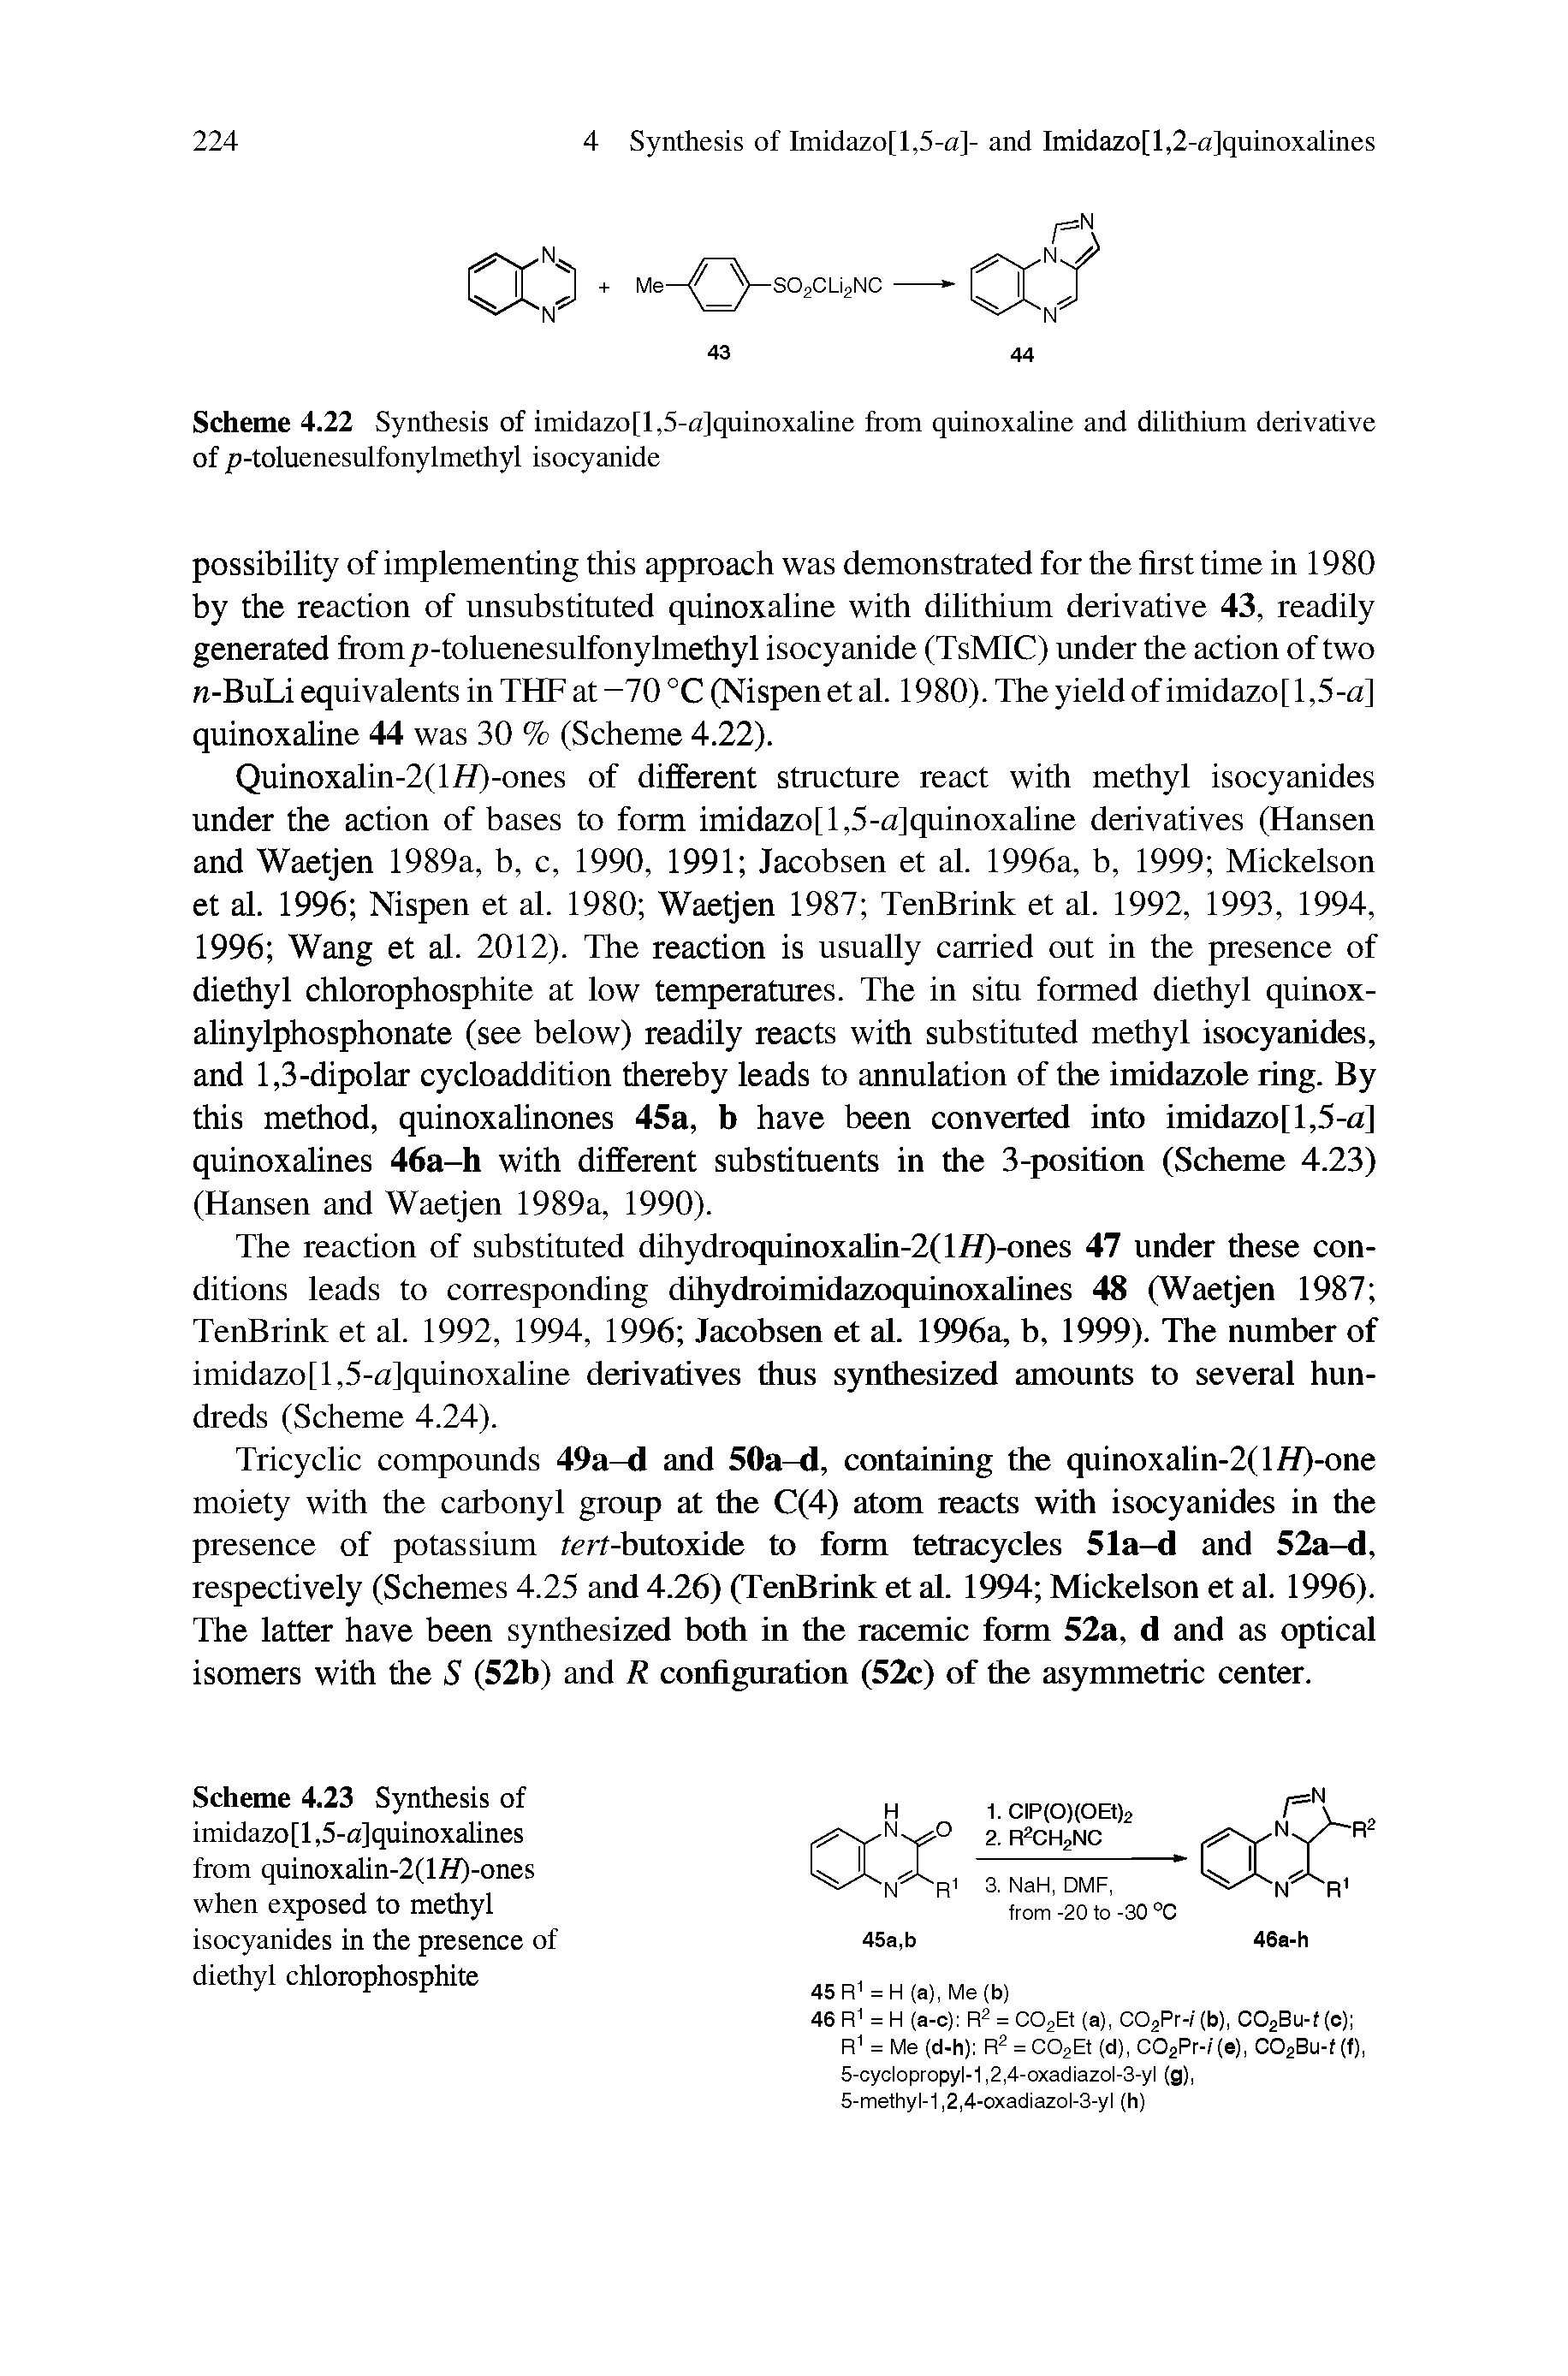 Scheme 4.22 Synthesis of imidazo[l,5-a]quinoxaline from quinoxaline and dilithium derivative of /r-toluenesulfonylmethyl isocyanide...